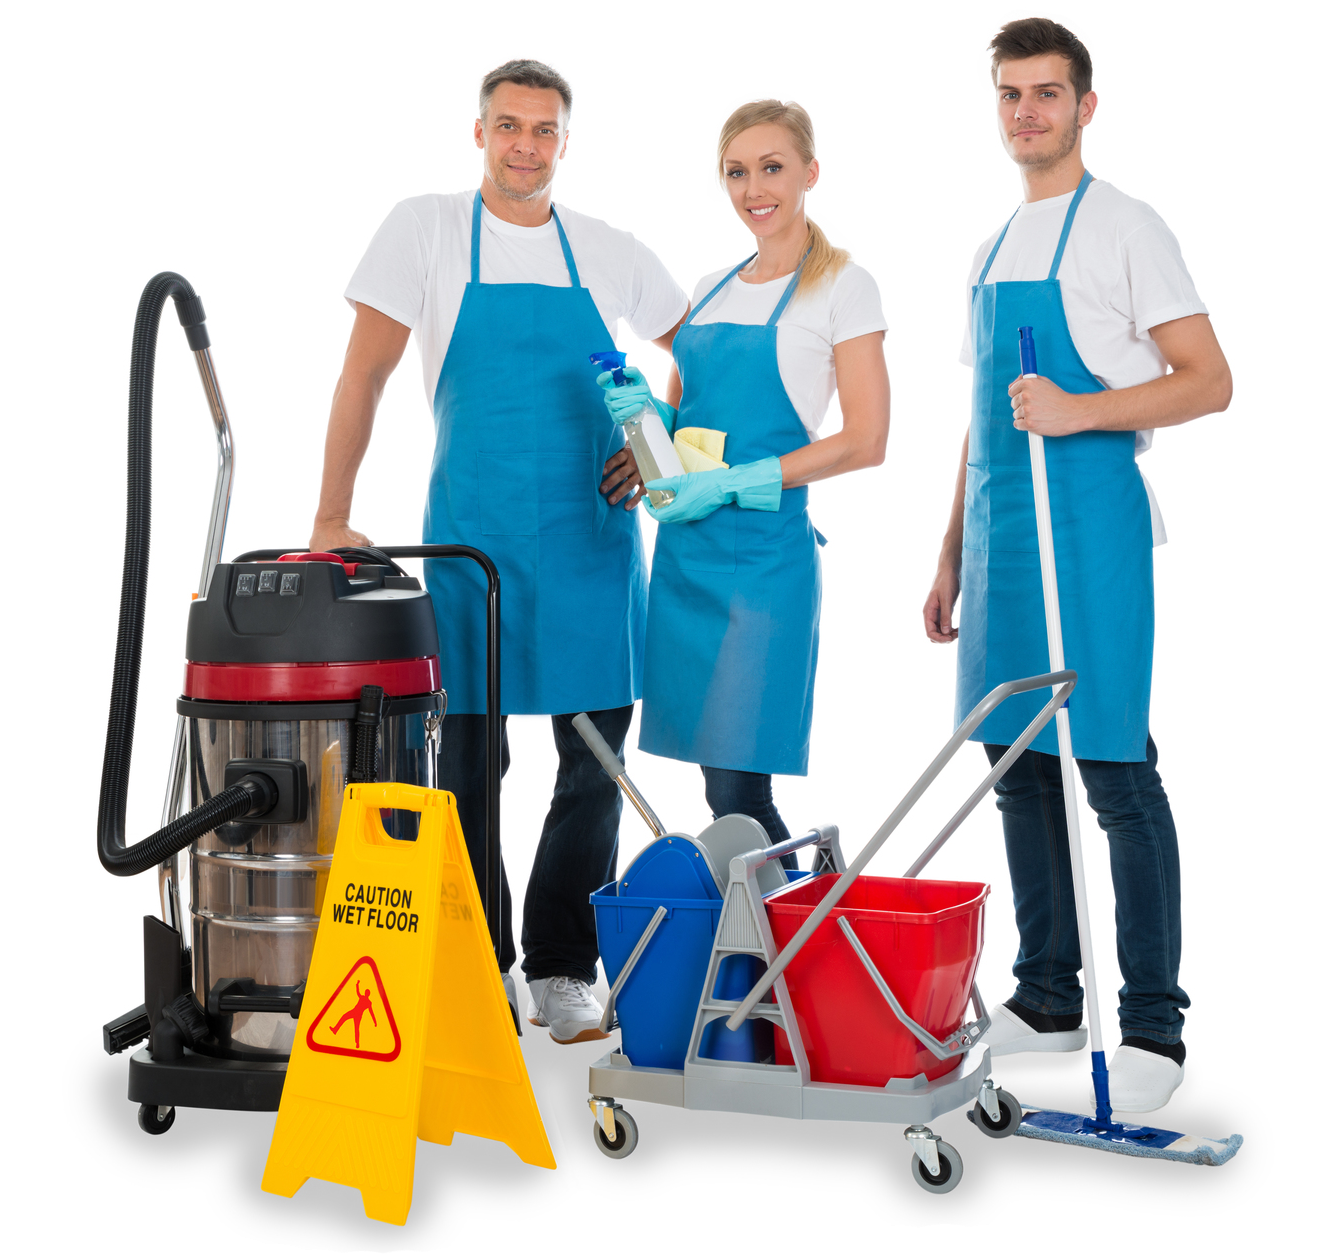 Our Cleaners Provide Professional Cleaning Service - Group Of Janitors (1486x1290)